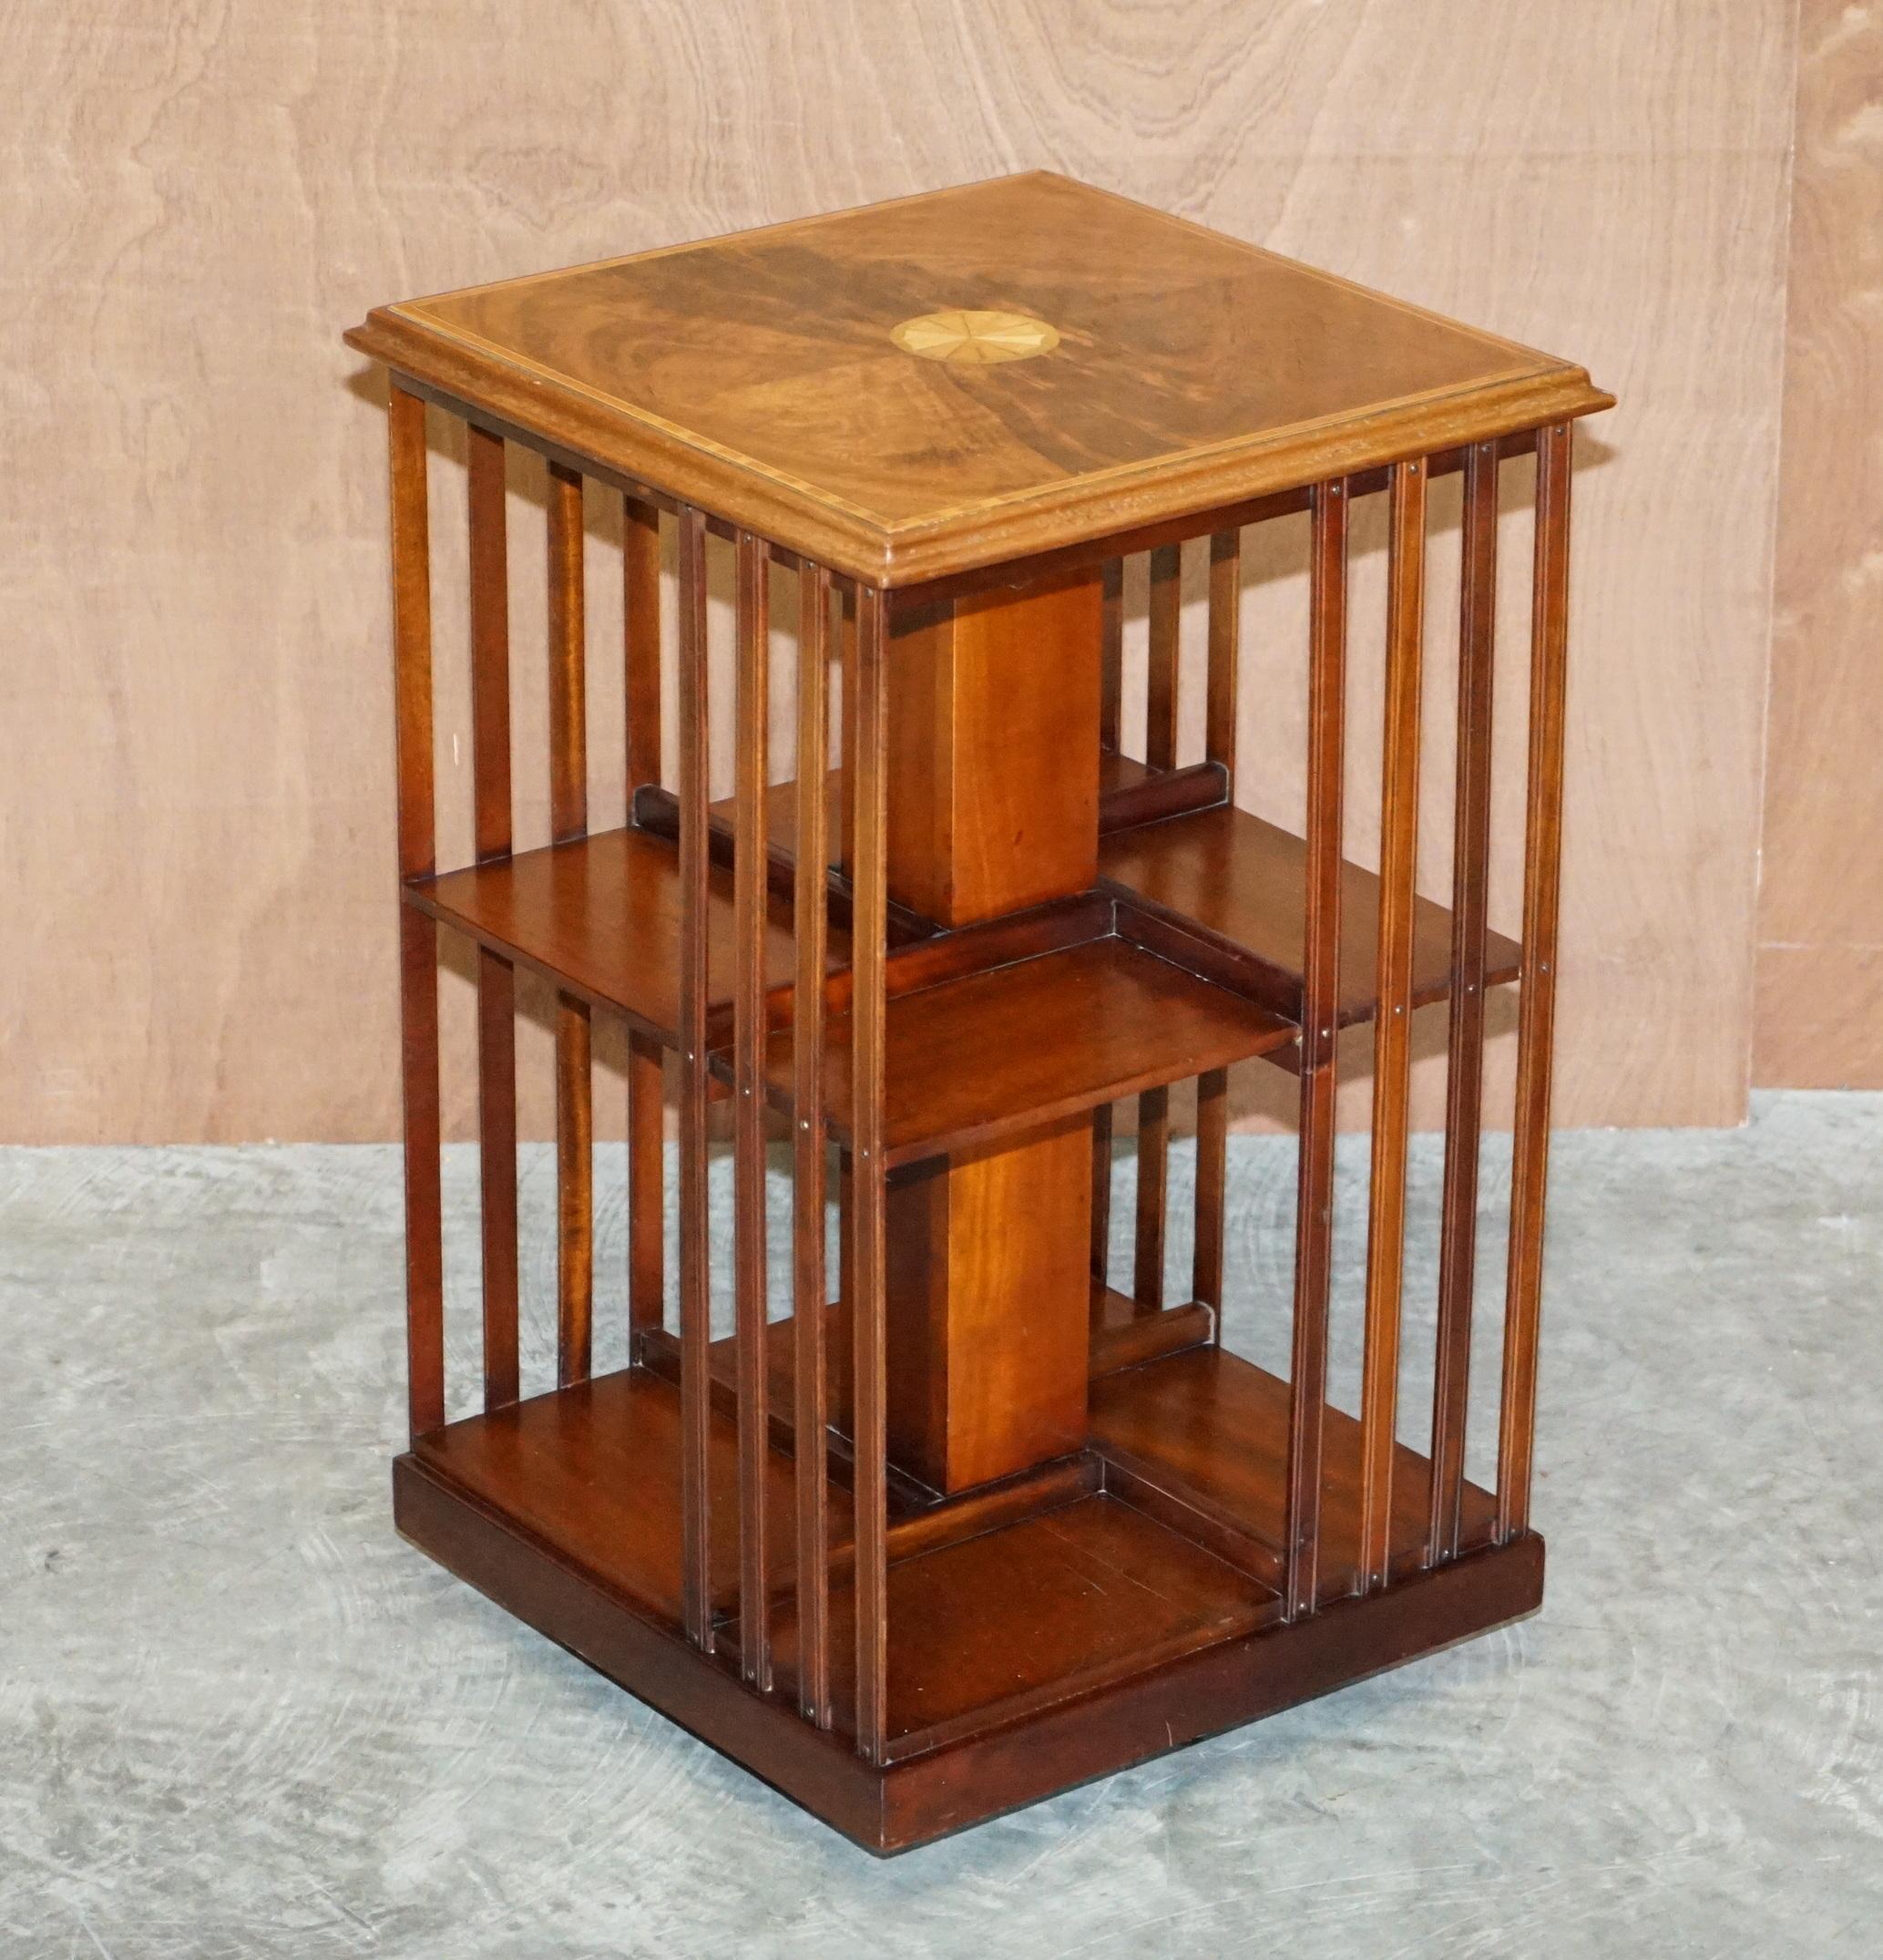 We are delighted to offer for sale this very fine antique Sheraton Revival Mahogany & Satinwood revolving bookcase table

A very good looking well made and decorative piece. Made in the Sheraton revival style with wonderful inlay and extremely